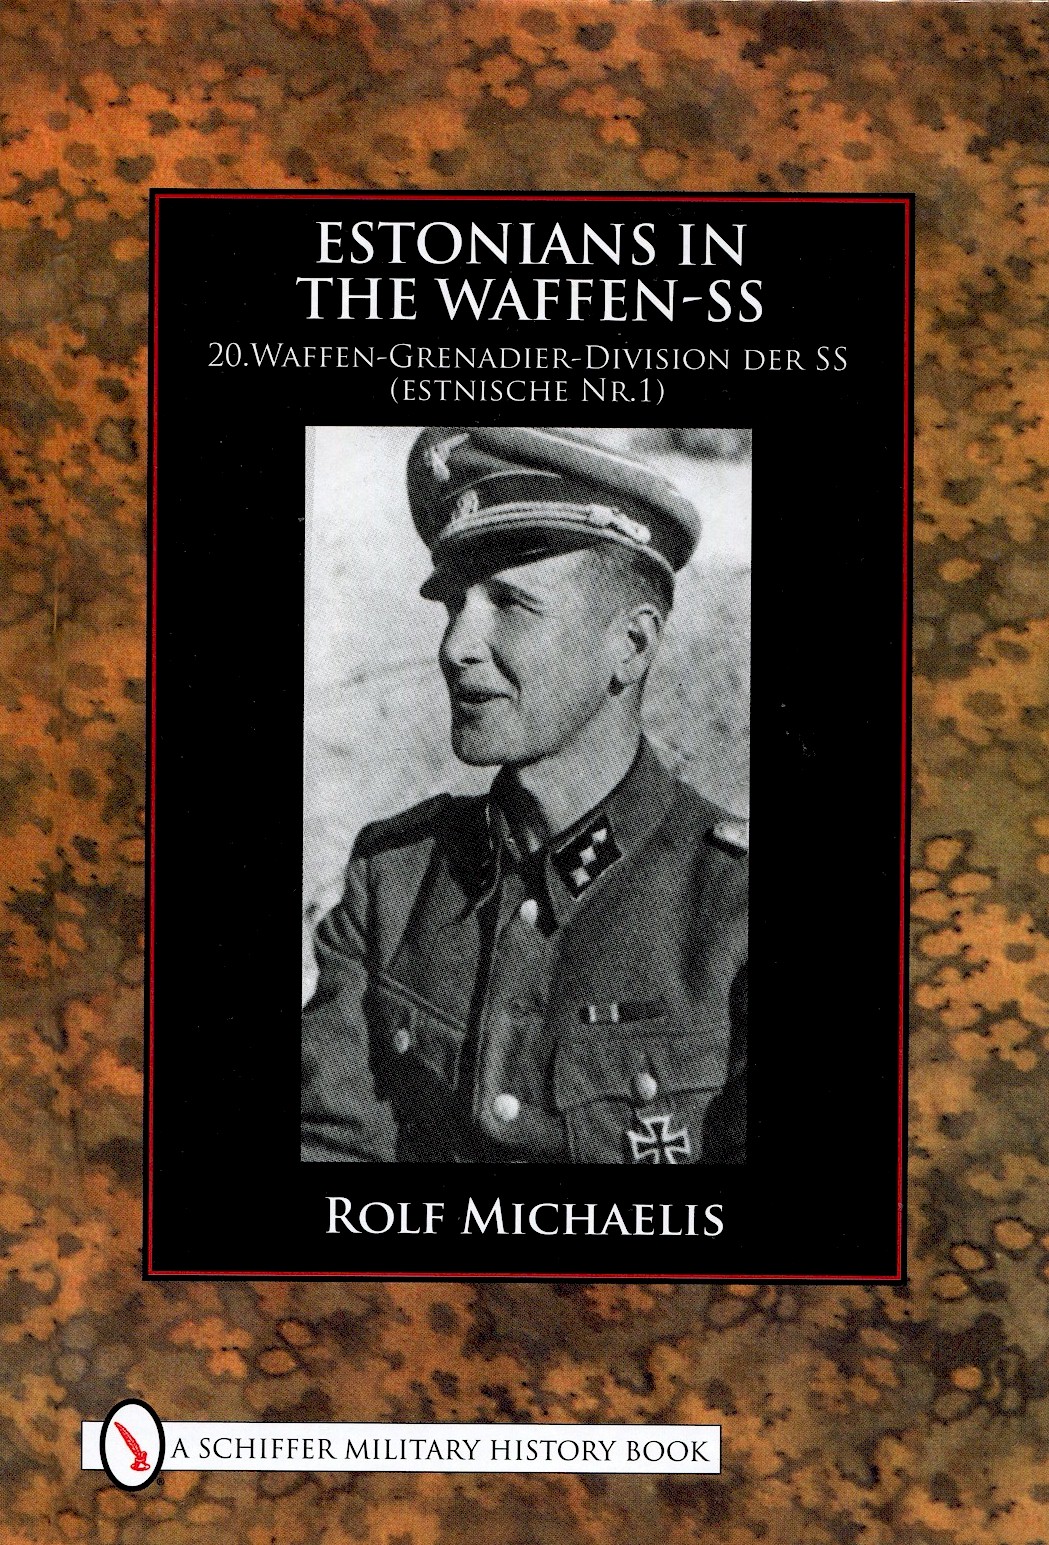 ESTONIANS IN THE WAFFEN-SS BY ROLF MICHAELIS